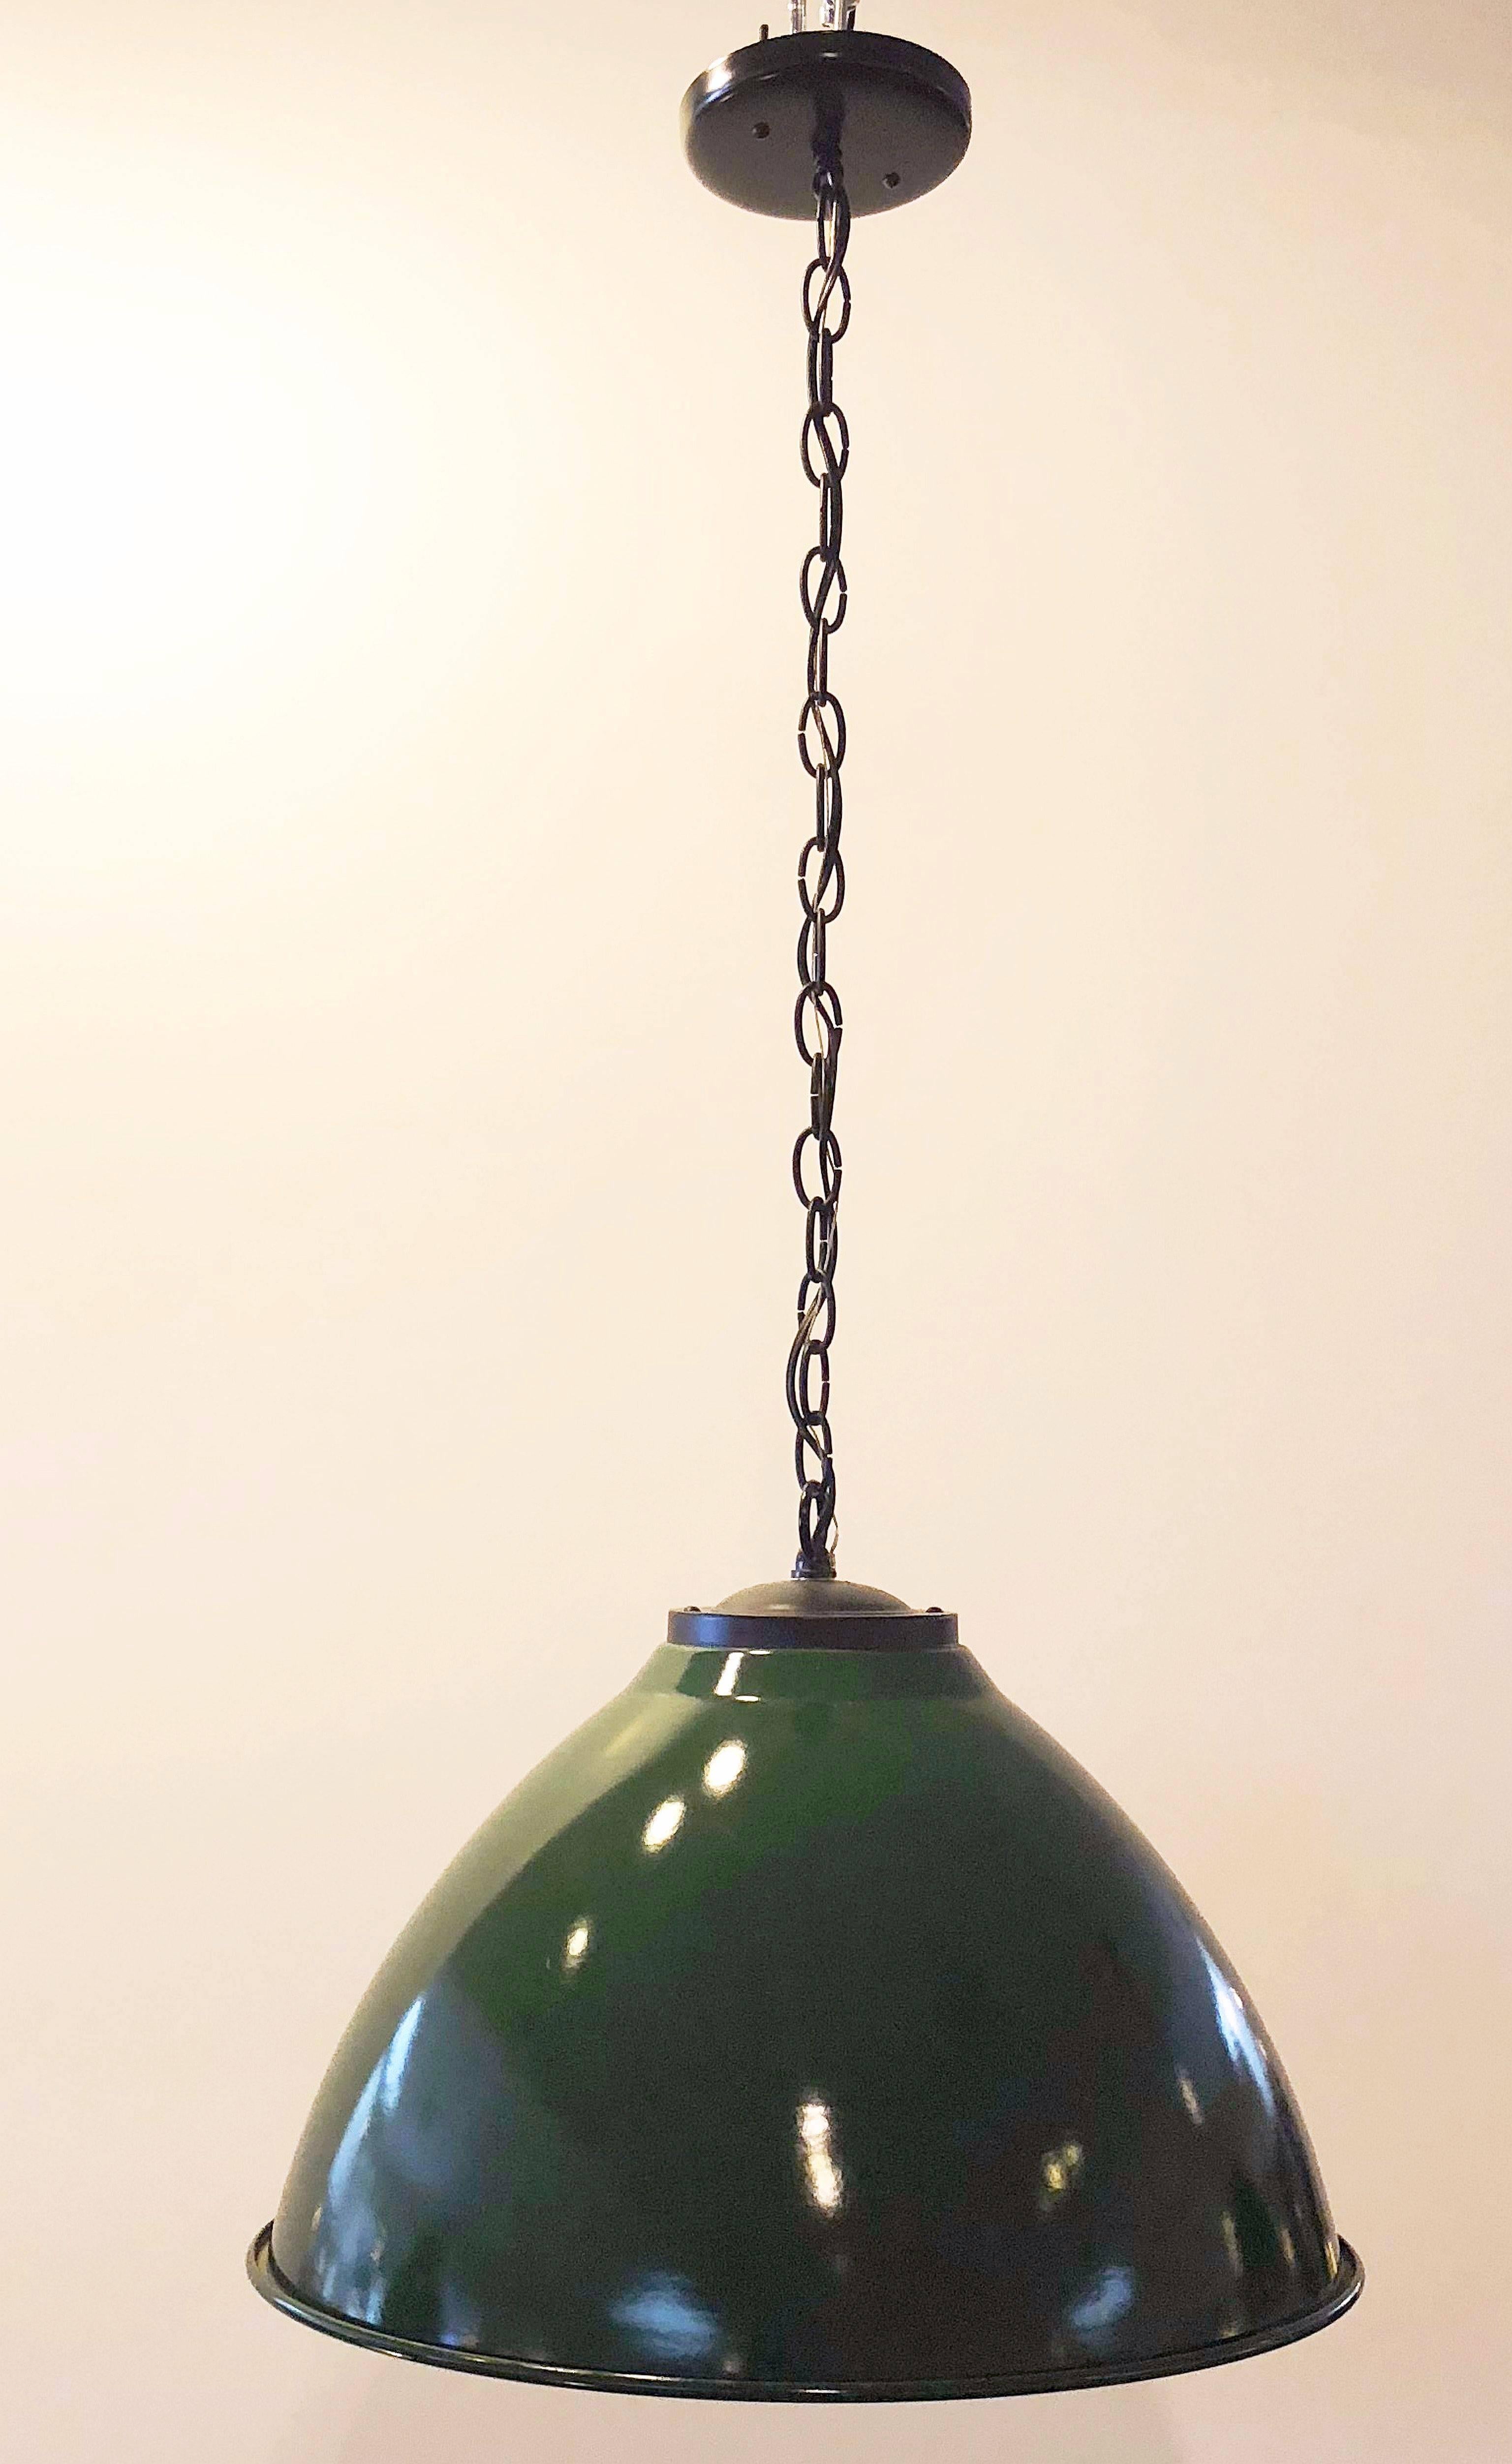 Enameled Green Tole Industrial Hanging Lamps or Lanterns from England (18 1/4